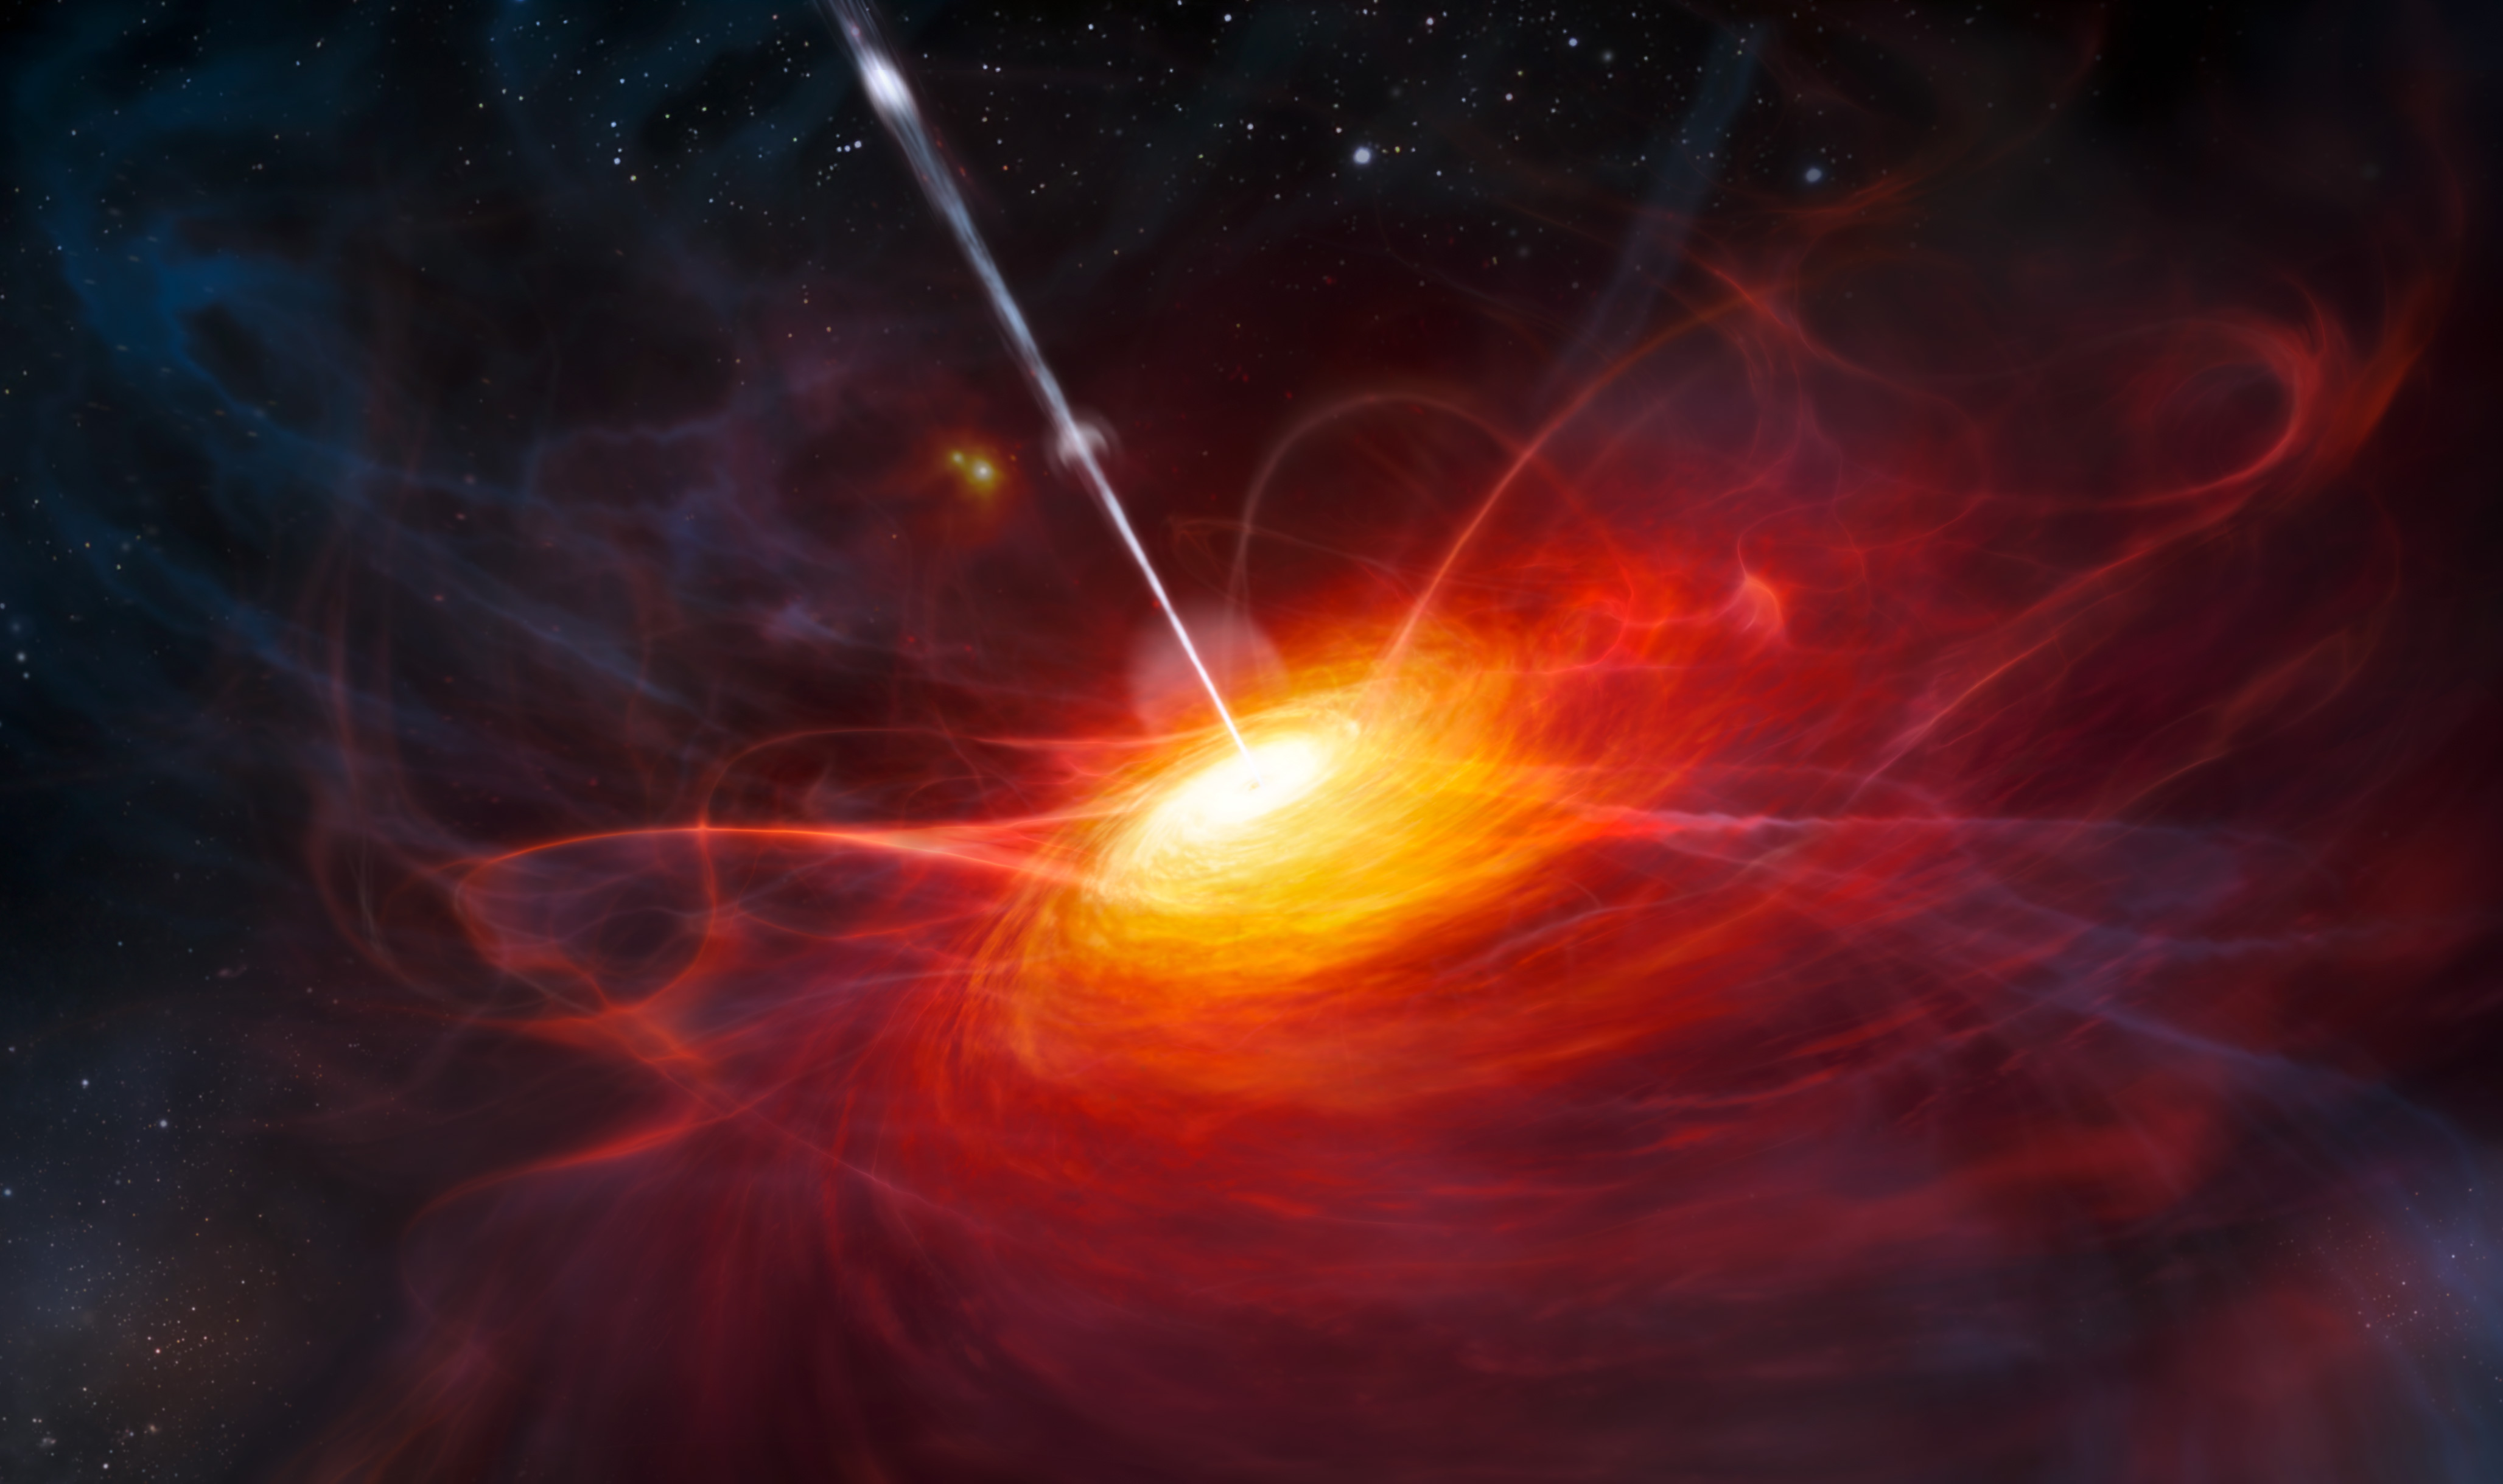 Astronomers study the radiation from supermassive black holes to track the expansion of the universe since the Big Bang